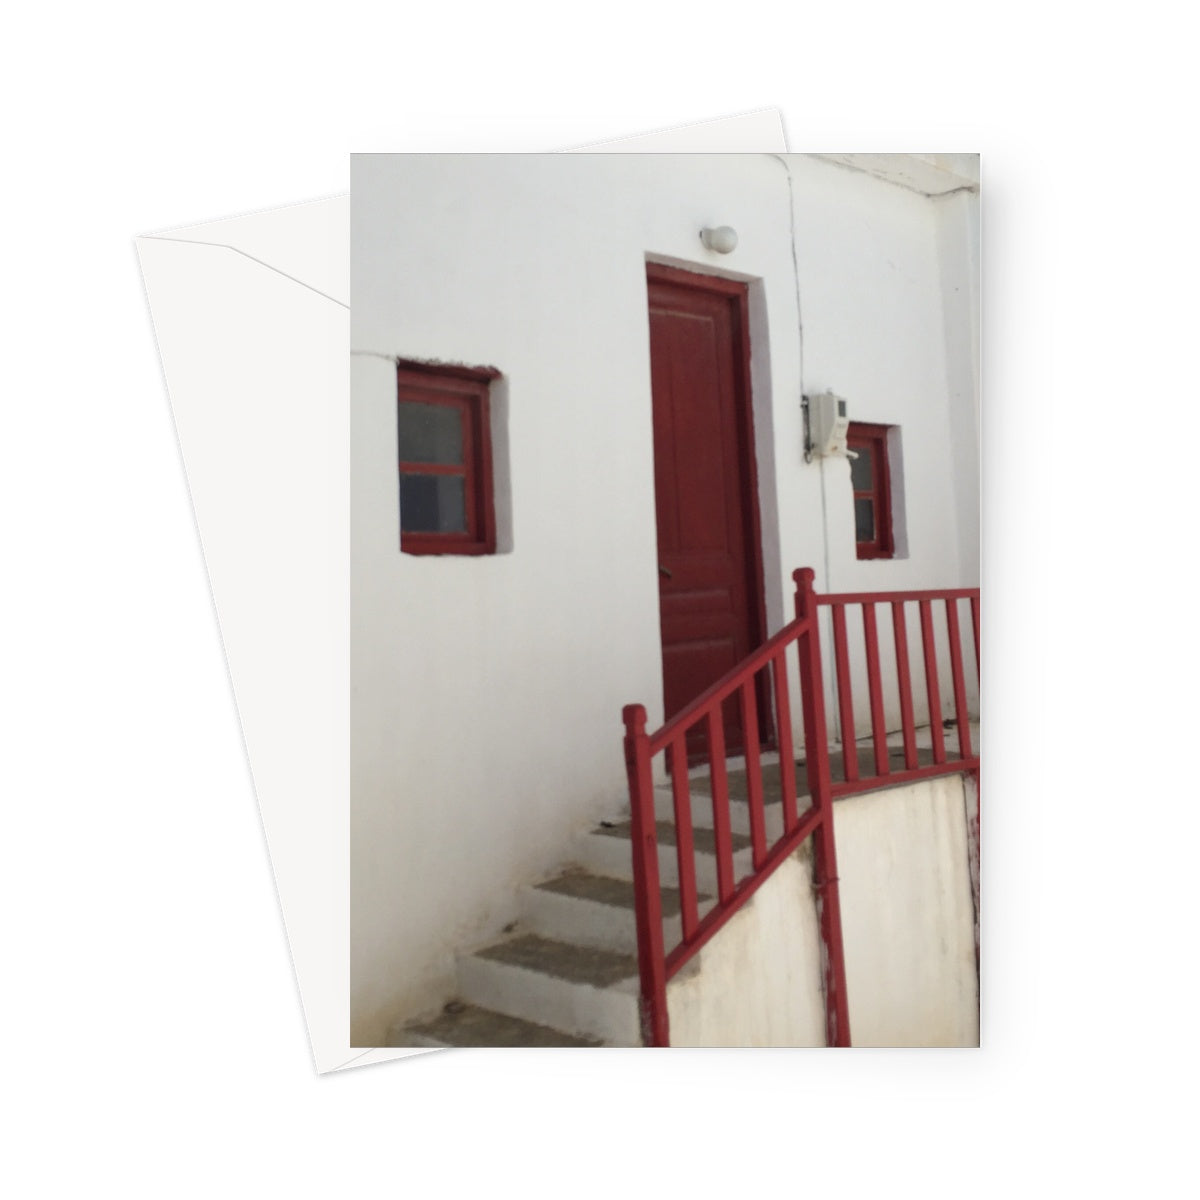 Greeting card showing red staircase against a traditional whitewashed Greek house. There is a red door and two small red windows.